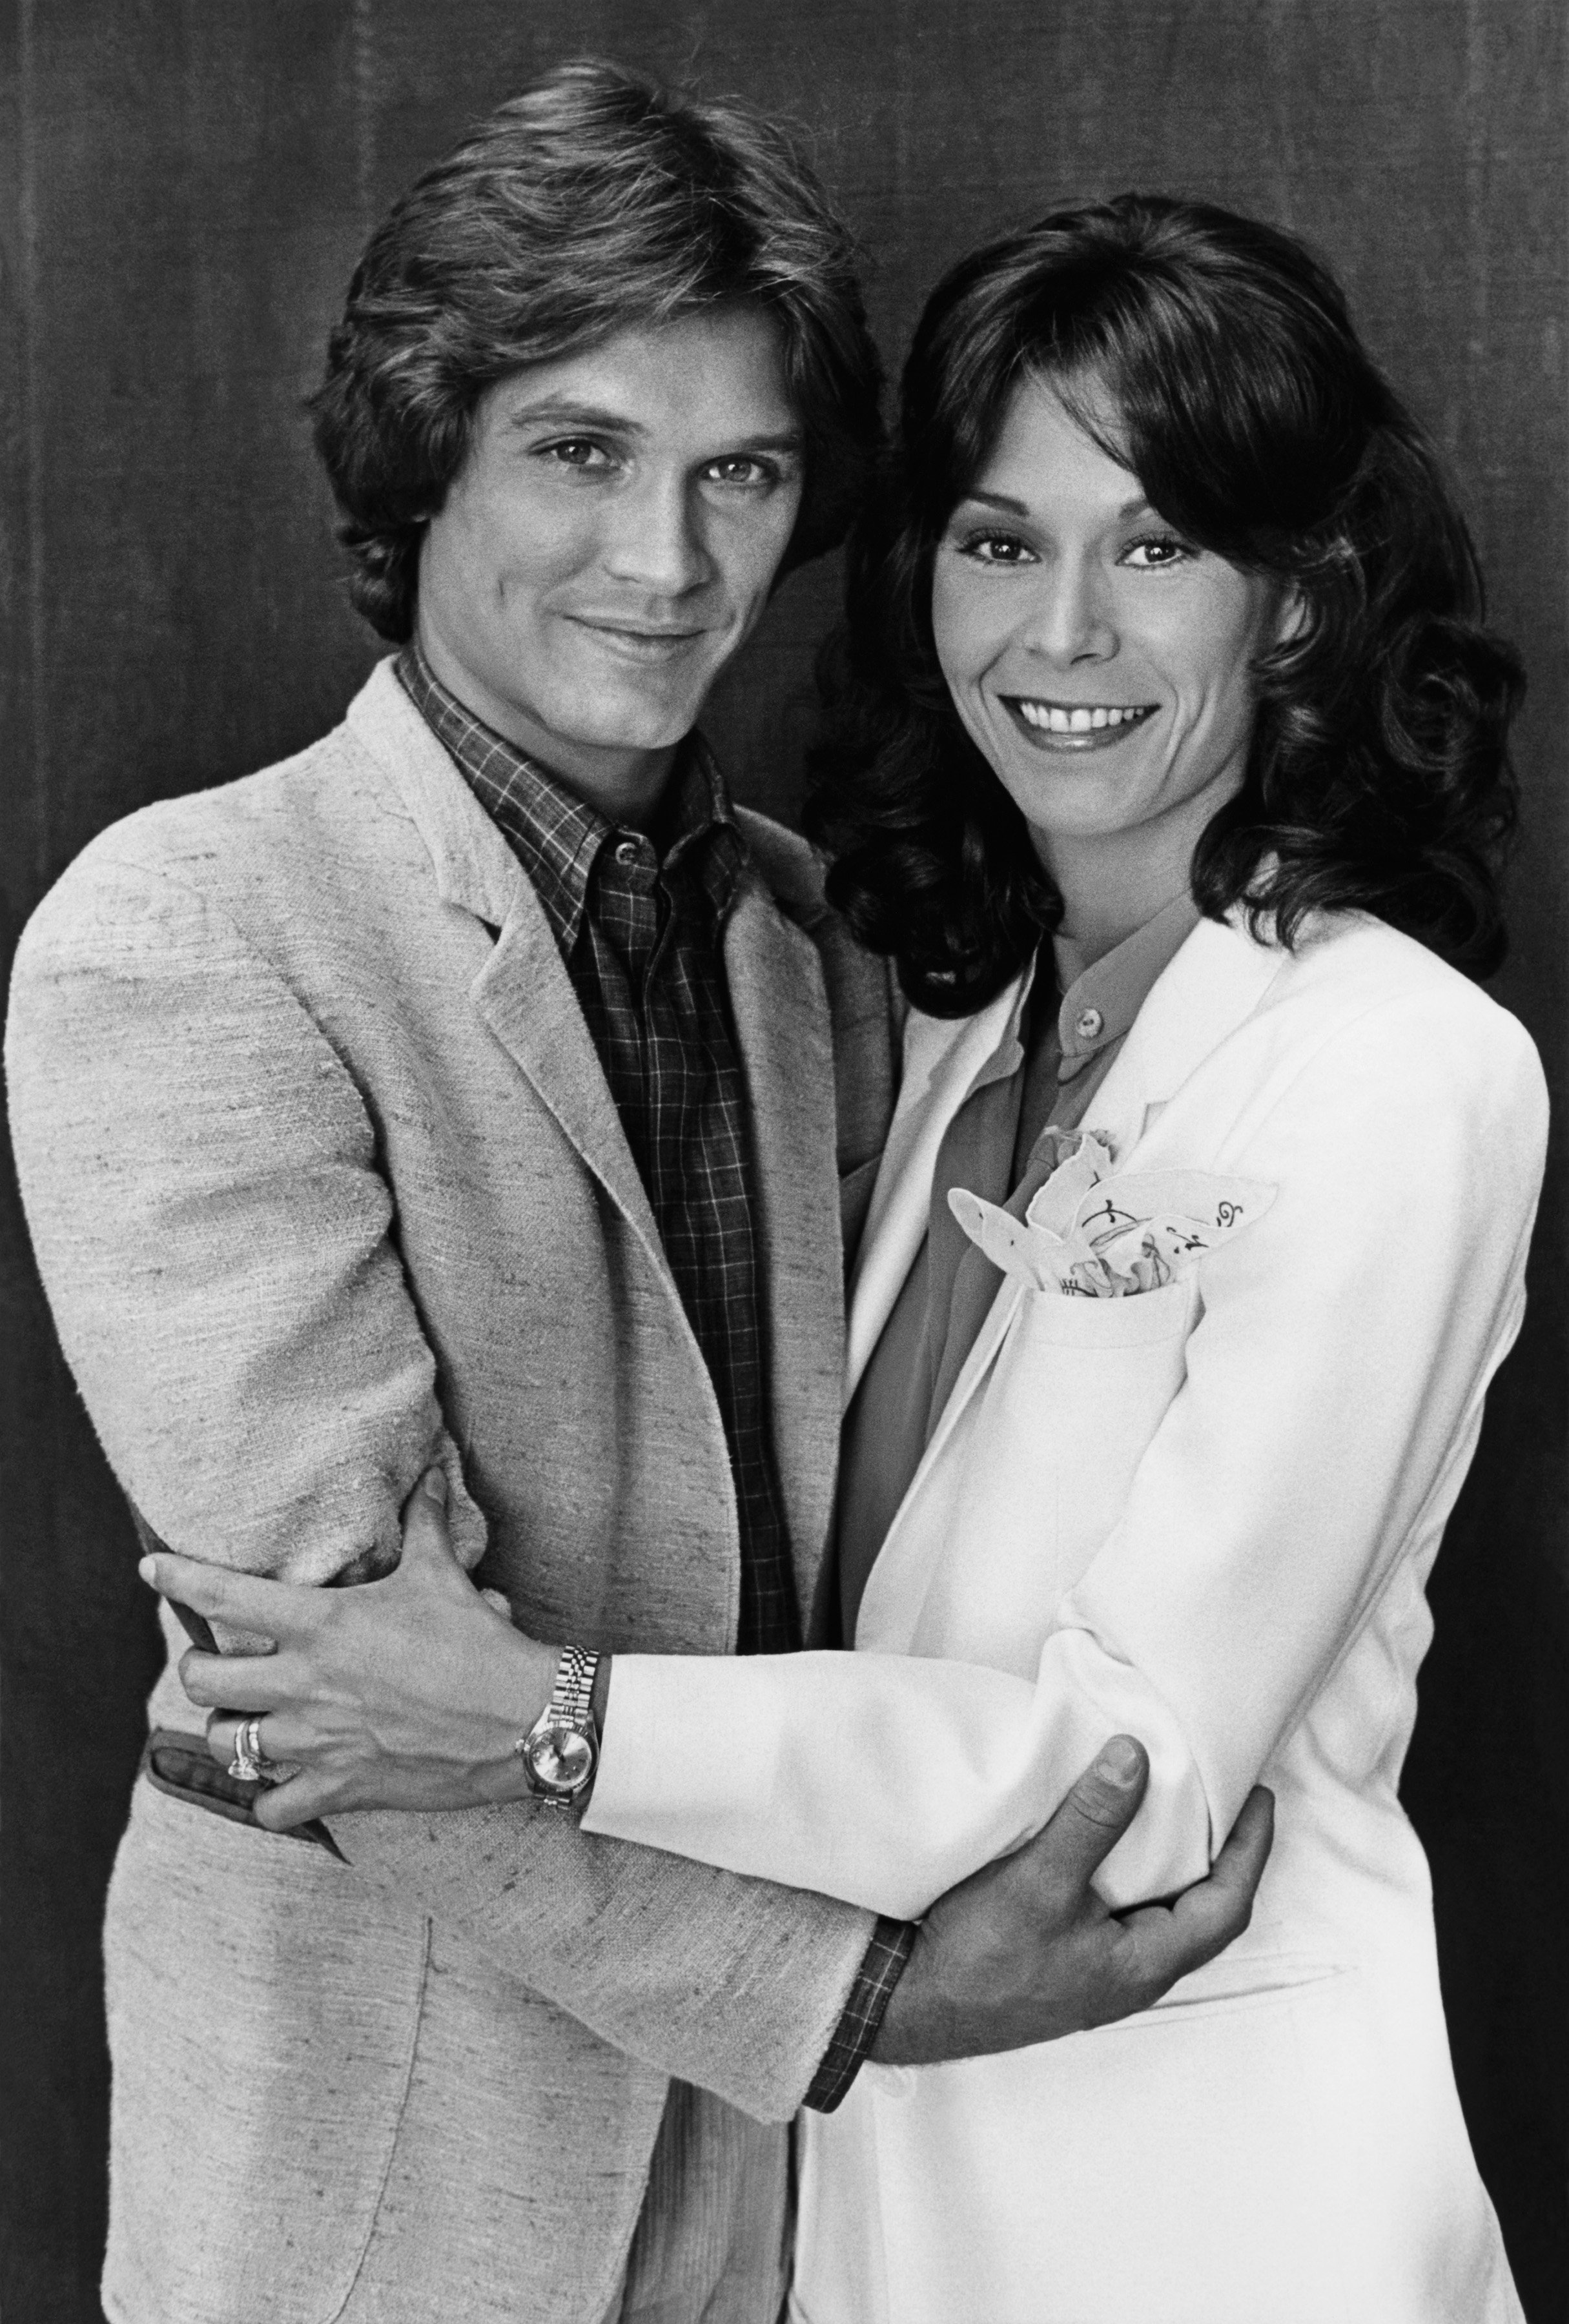 Kate Jackson pictured posing with her newly-wedded husband Andrew Stevens following their nuptials in 1978 in Beverly Hills, California. / Source: Getty Images